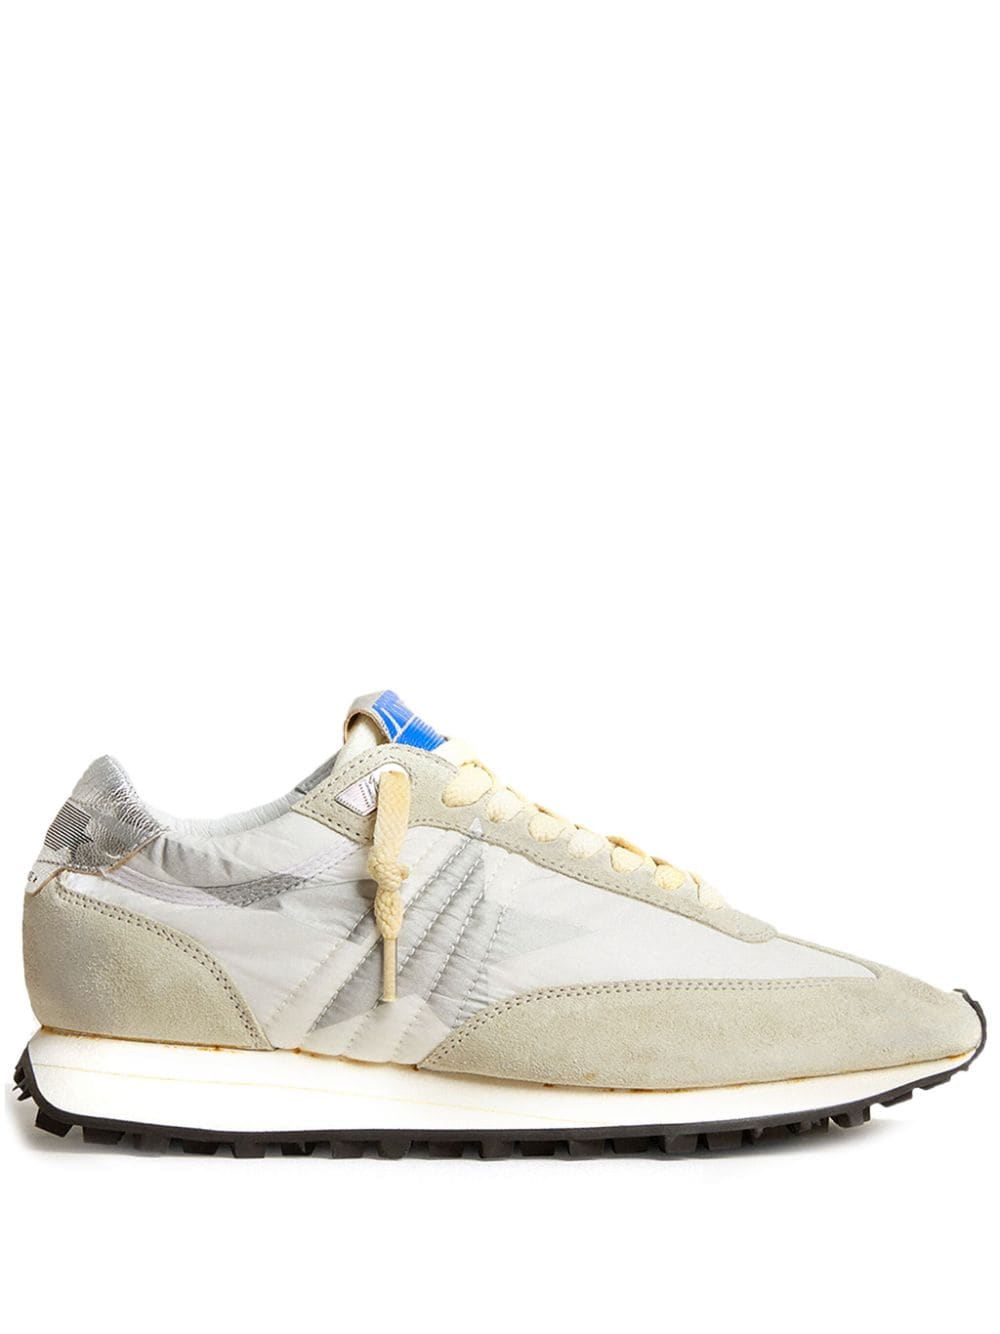 Golden Goose star-print lace-up sneakers - White von Golden Goose